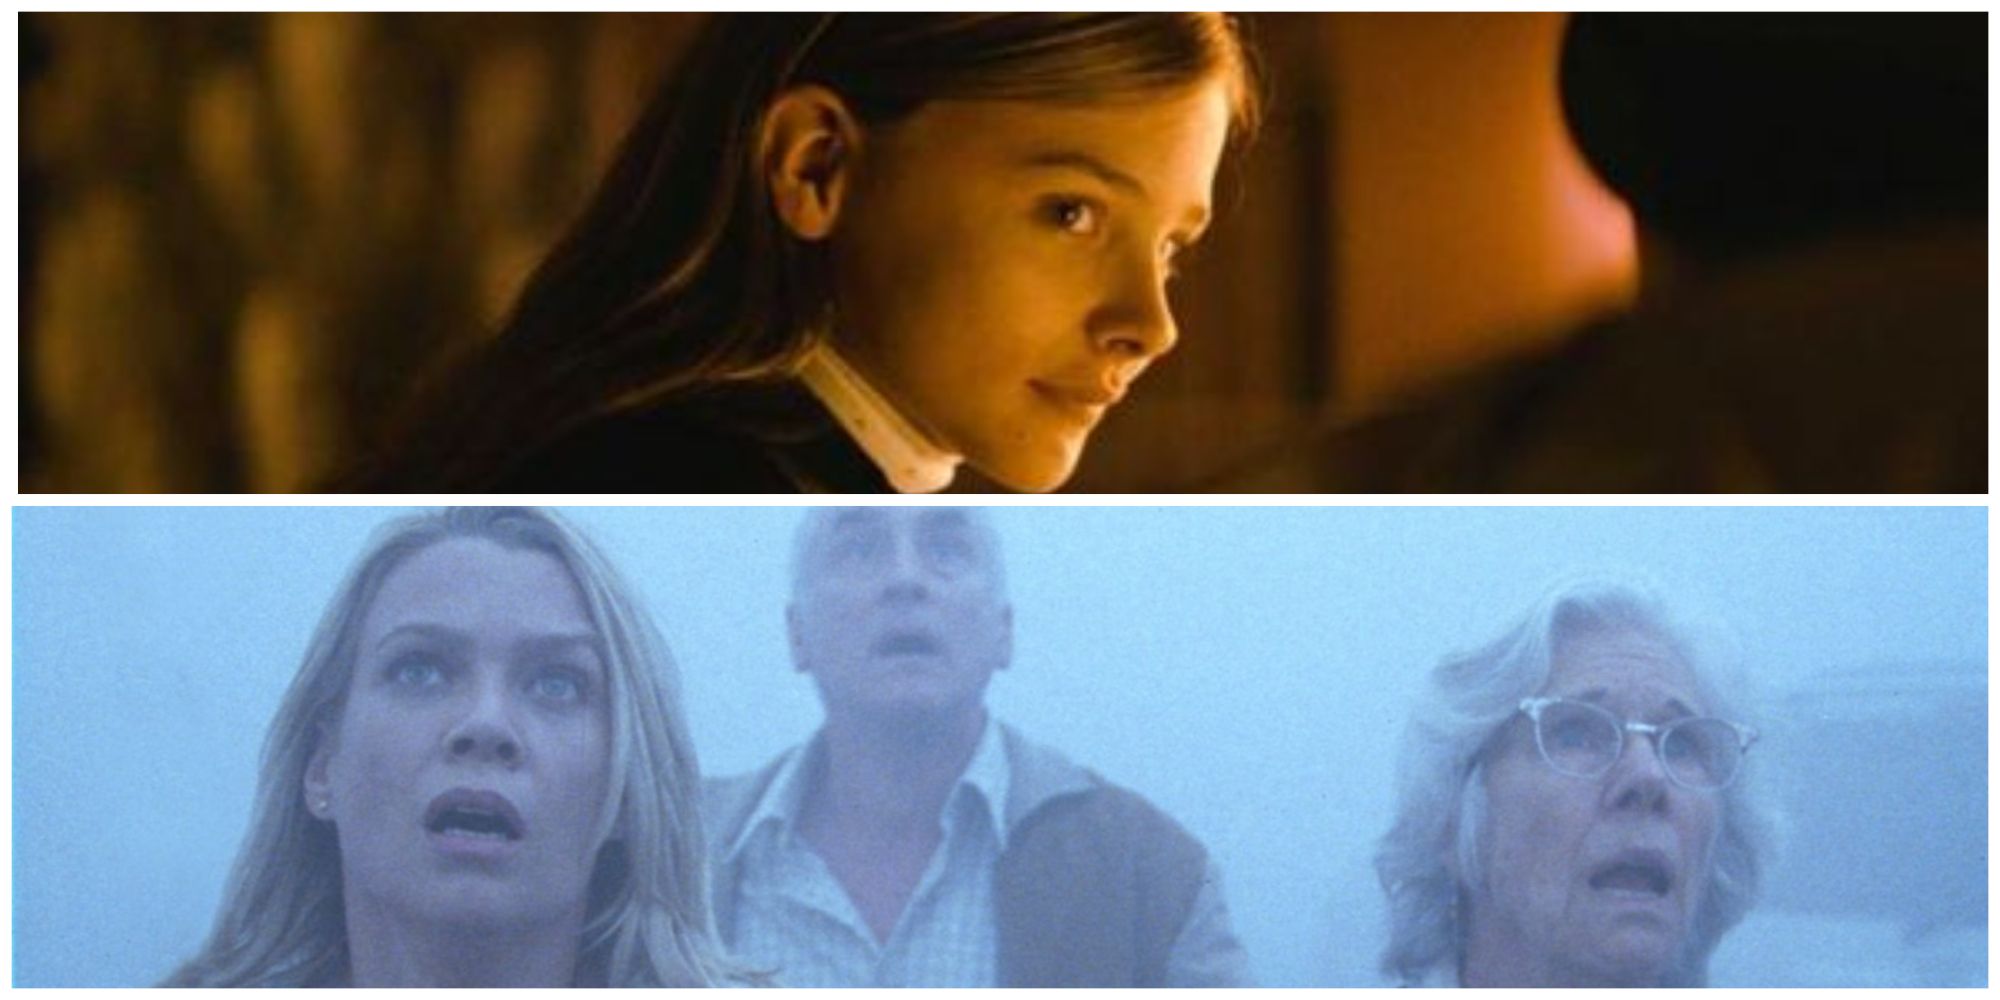 A split image of stills from The Mist and Let Me In